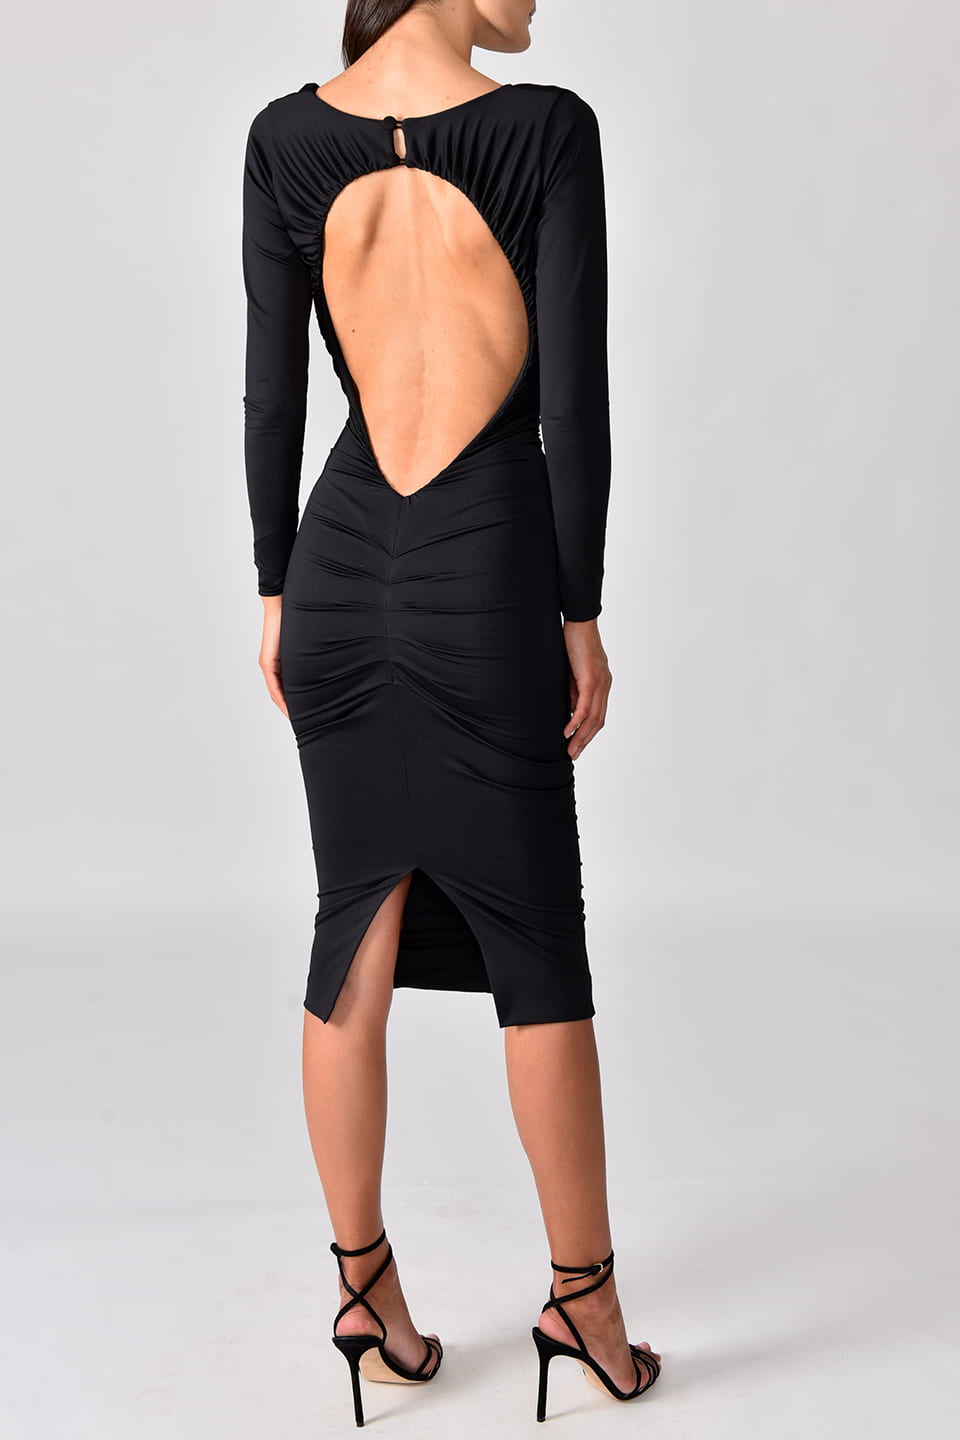 Thumbnail for Product gallery 2, Midi dress from fashion designer in black color, product backless detail